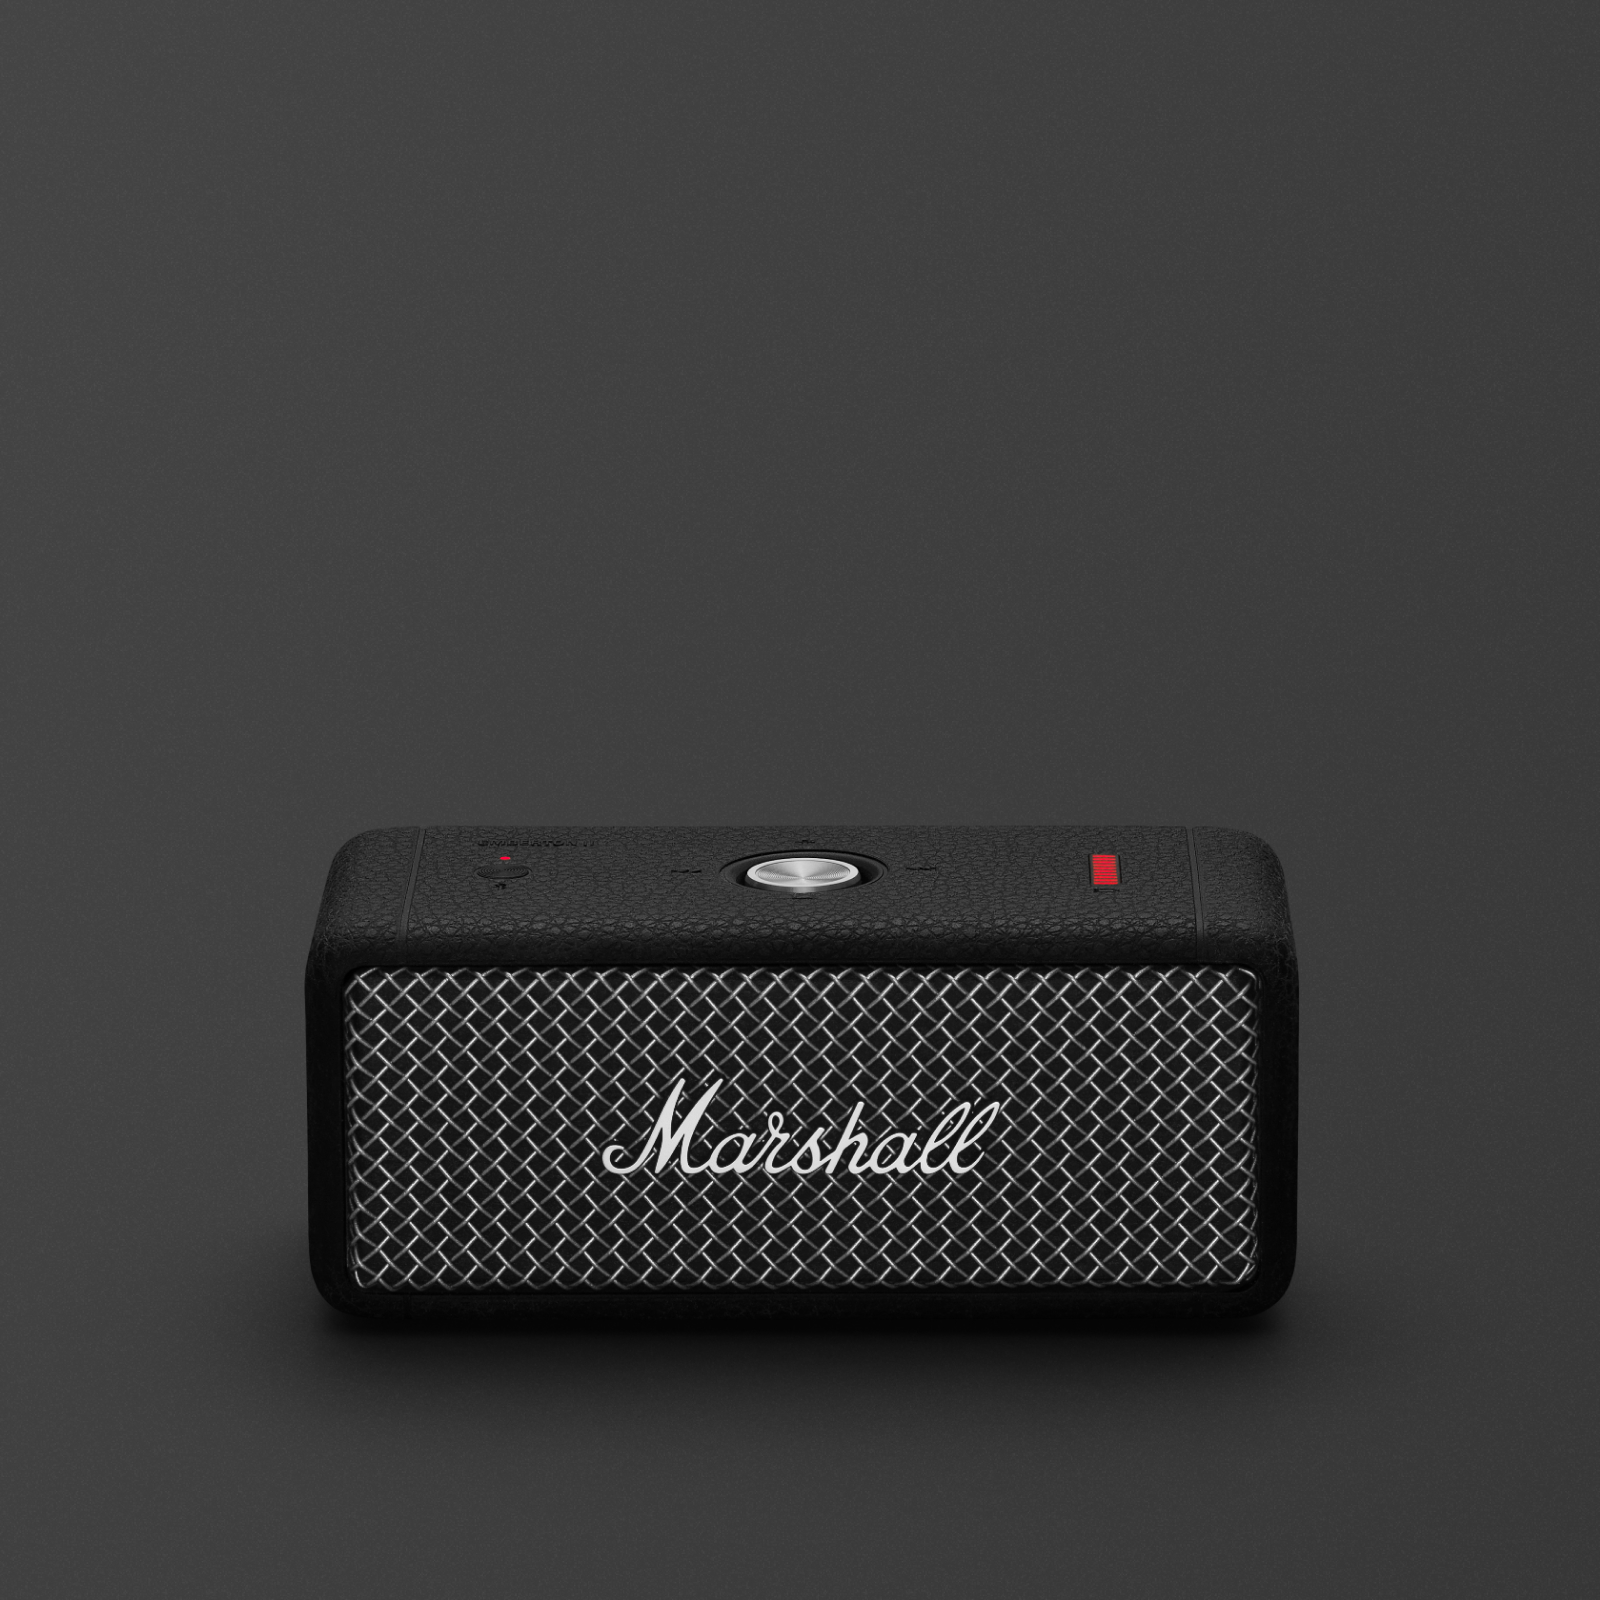 Front image of the 'Marshall Emberton II Black and Steel' portable speaker.